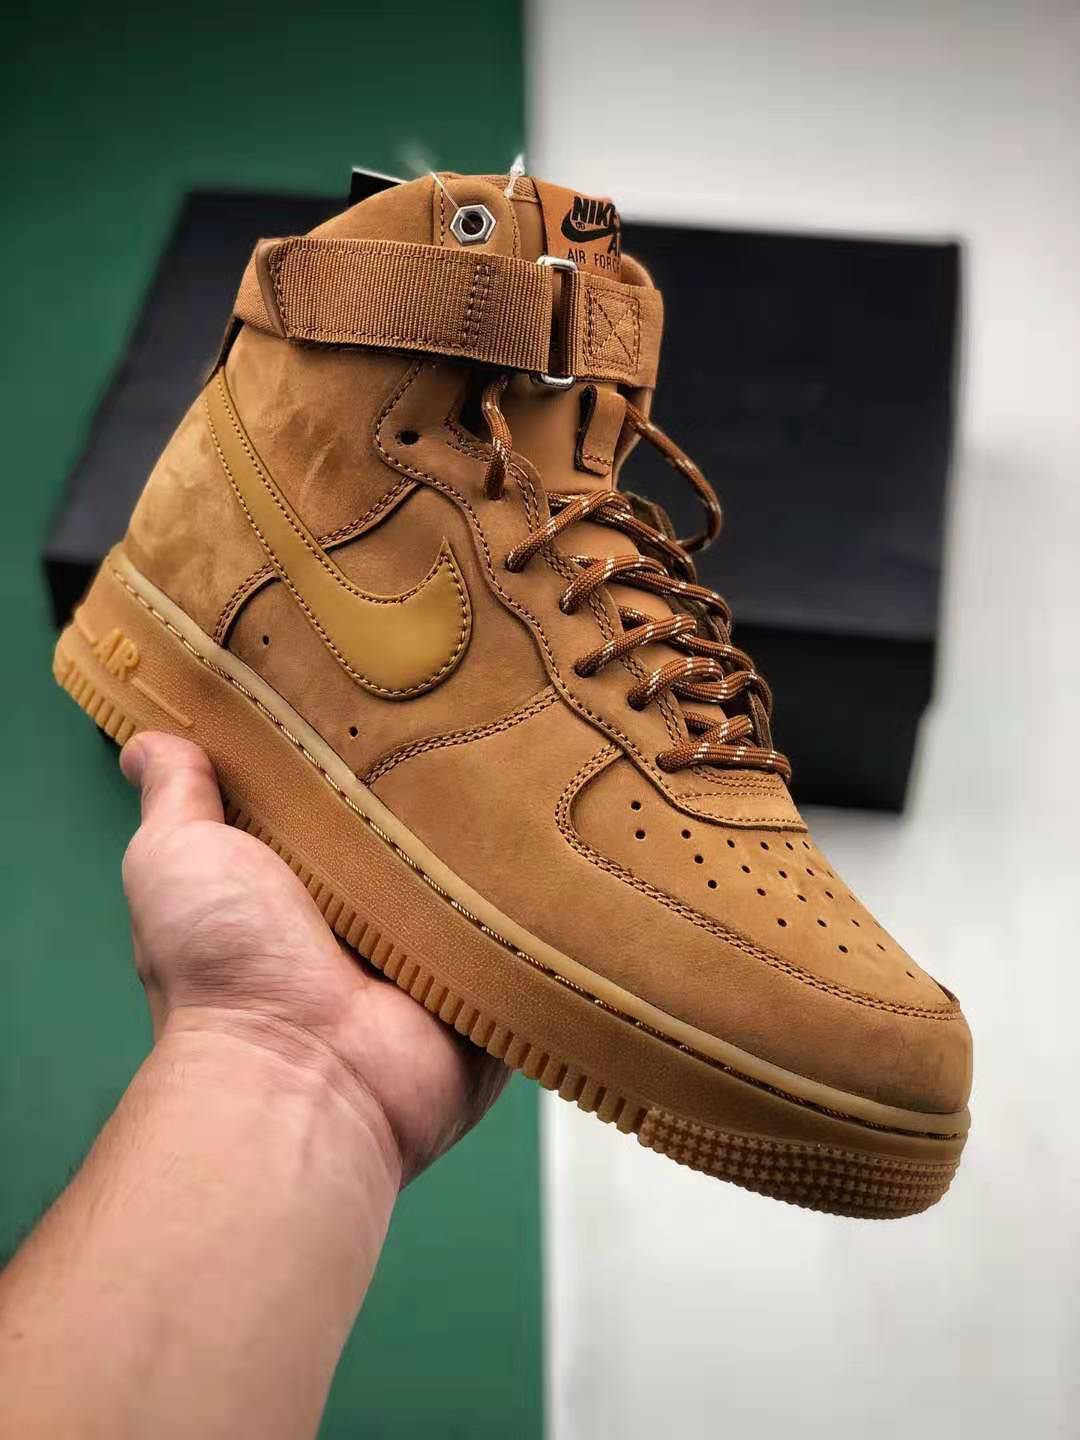 Nike Air Force 1 High Flax CJ9178-200 - Stylish and Timeless Sneakers